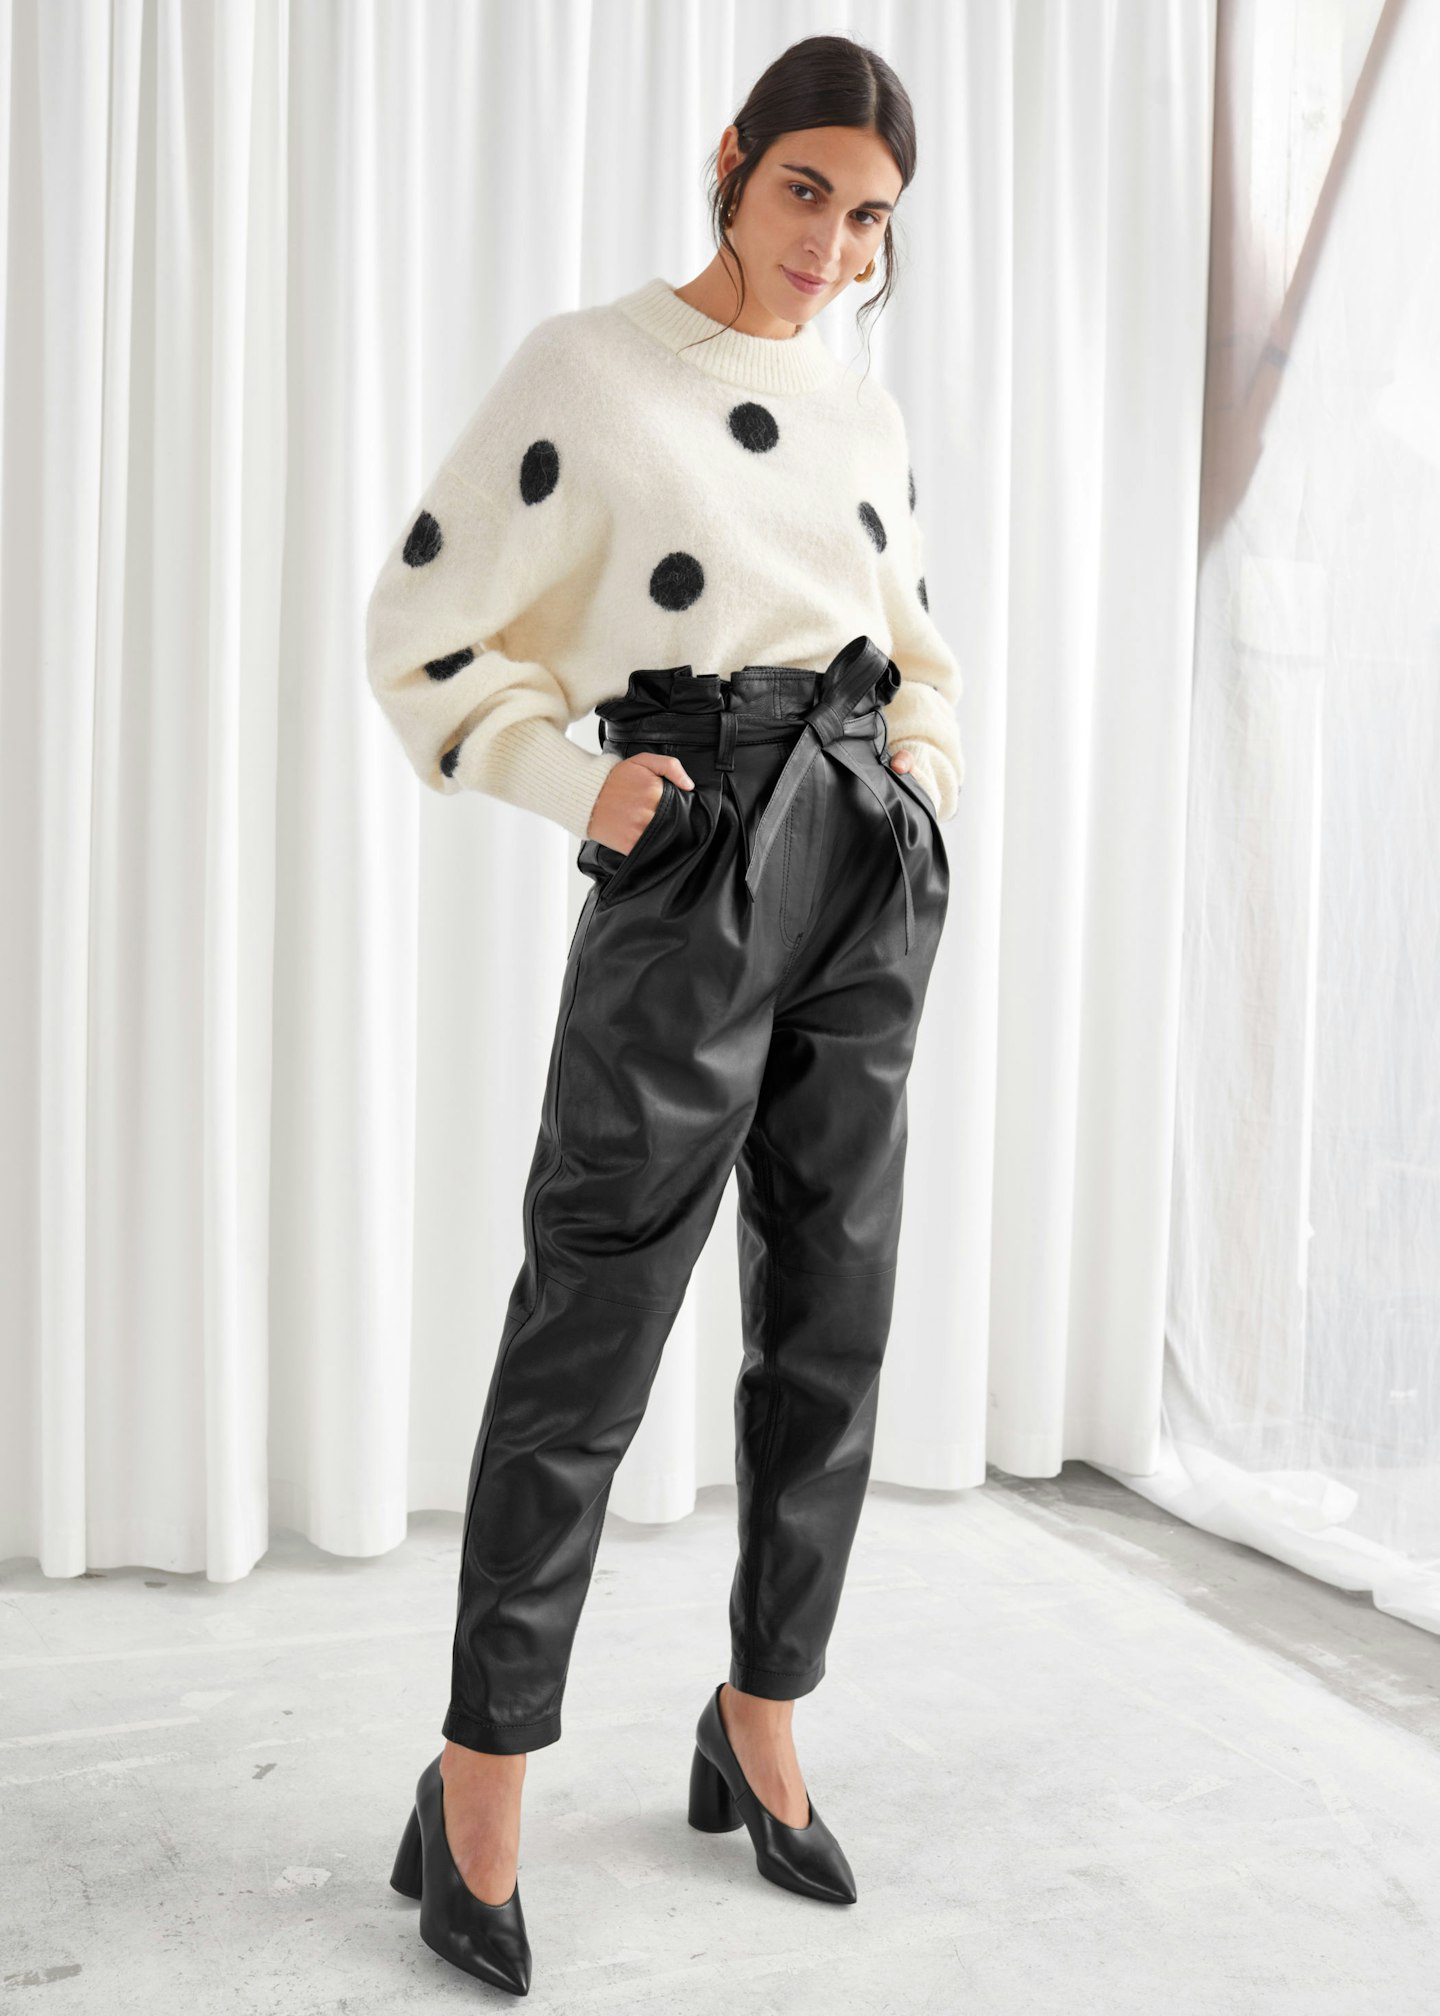 & Other Stories, Paperbag Waist Leather Trousers, £265